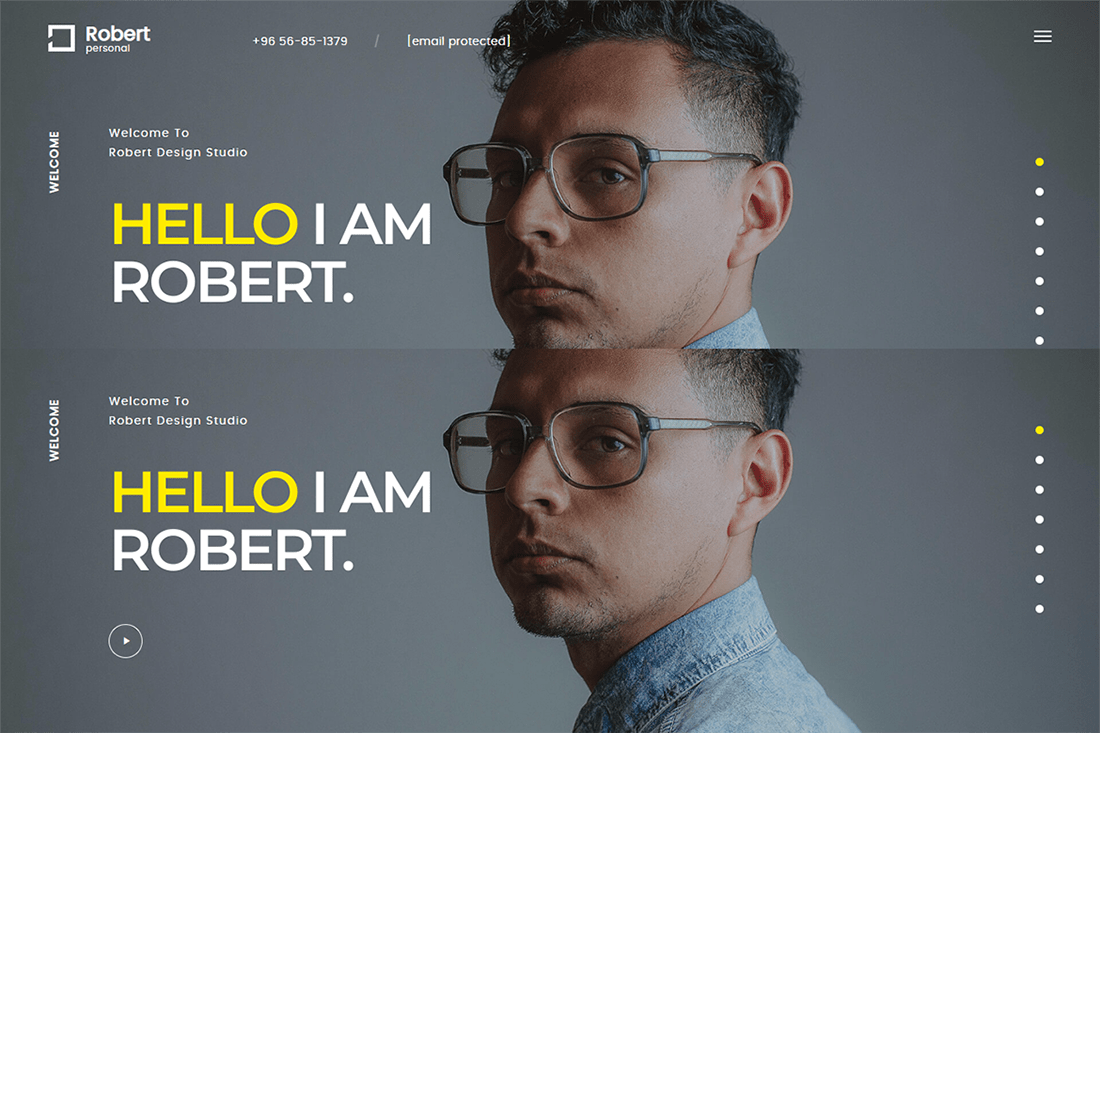 Free Personal One Page HTML Template cover image.